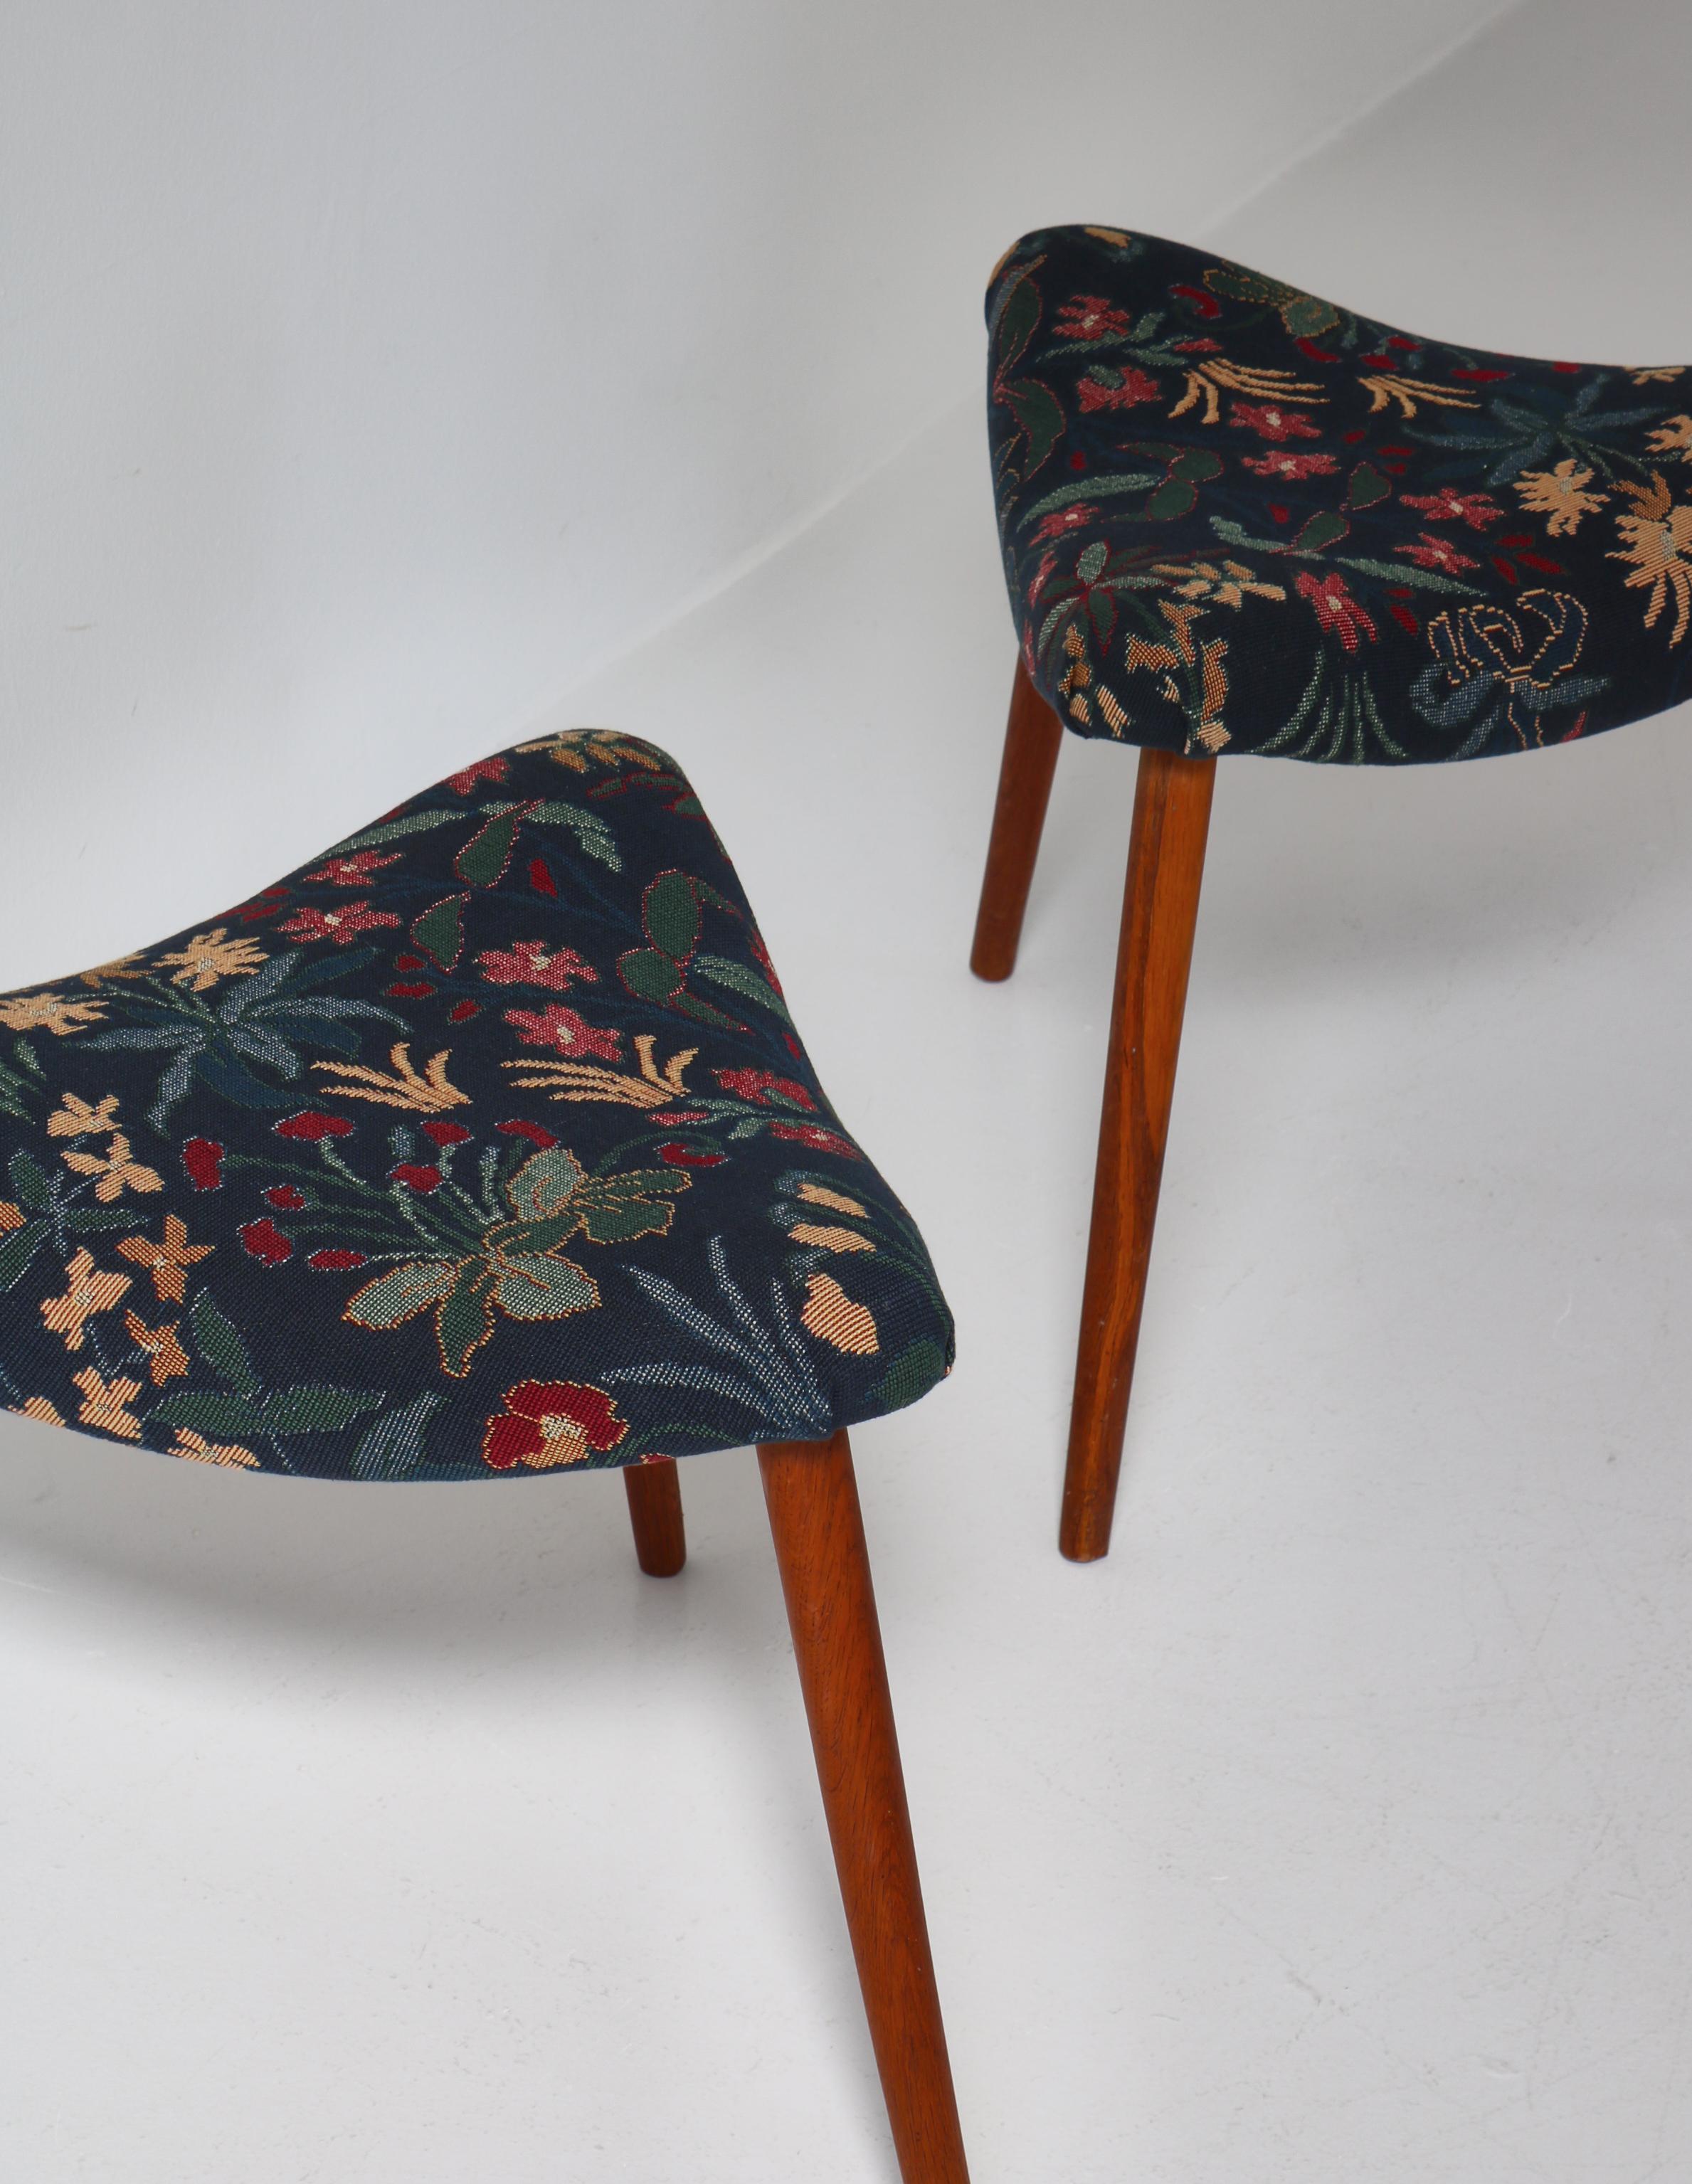 Scandinavian Modern Triangular Stools in Blue Floral Tapestry, 1950s For Sale 2